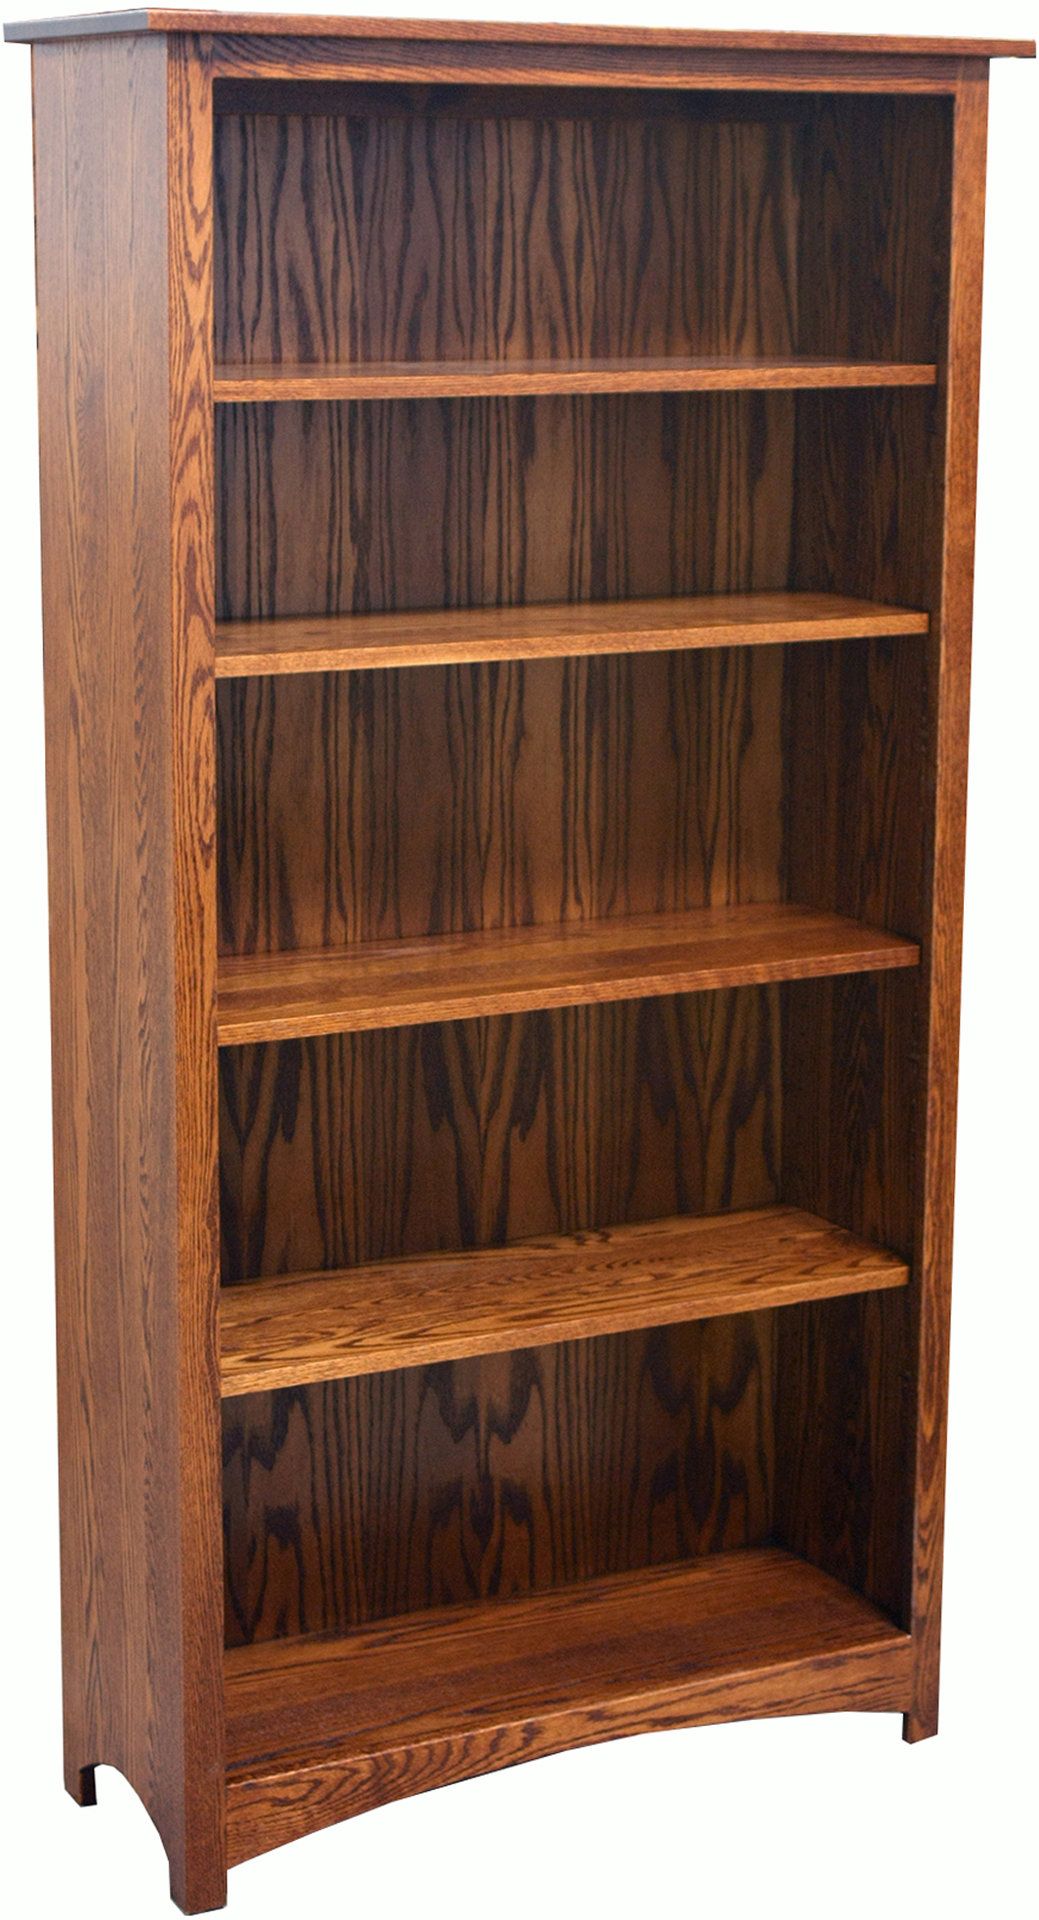 Shaker 39 Inch Bookcase | Amish Bookcase | Solid Hardwood Bookcase In 39 Inch Bookcases (View 2 of 15)